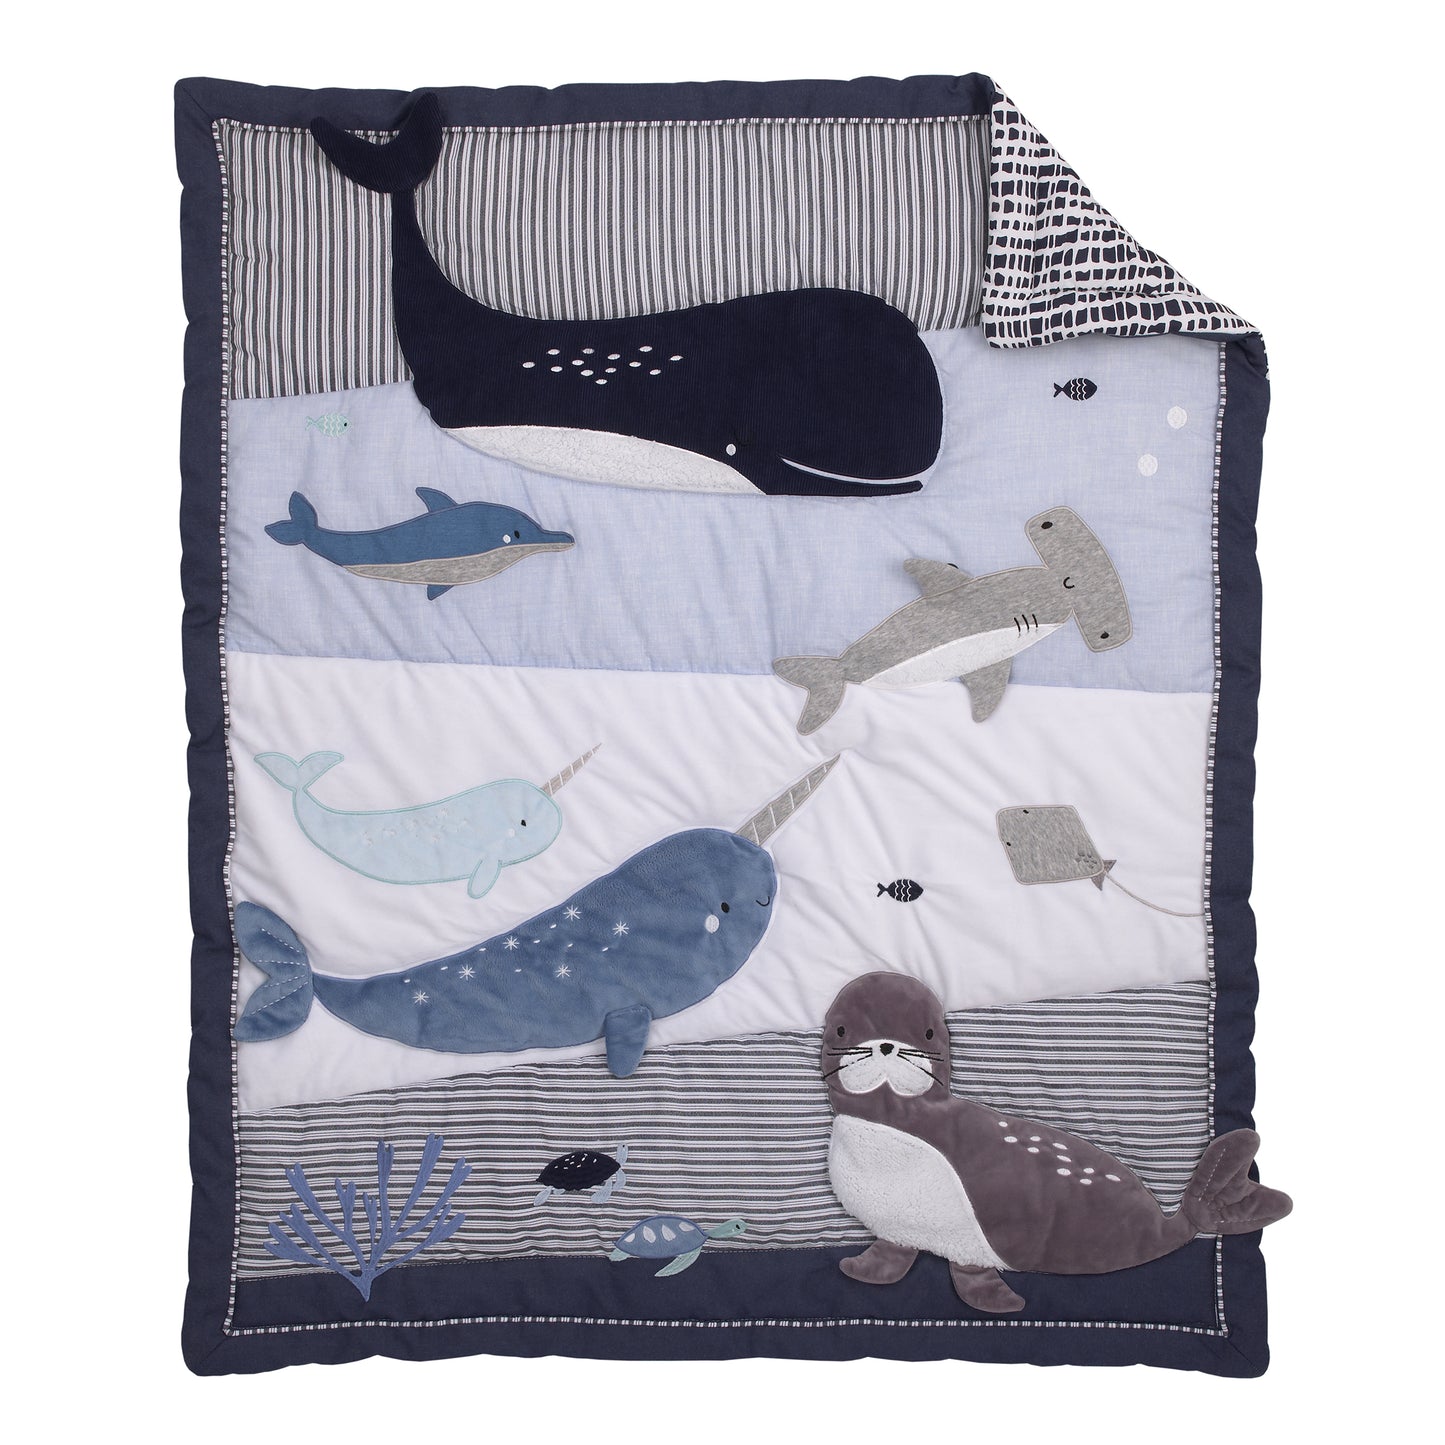 NoJo Seas The Day Blue and White Whale, Narwhal, Sea Lion, Shark 4 Piece Crib Bedding Set - Comforter, 100% Cotton Fitted Crib Sheet, Crib Skirt, and Storage